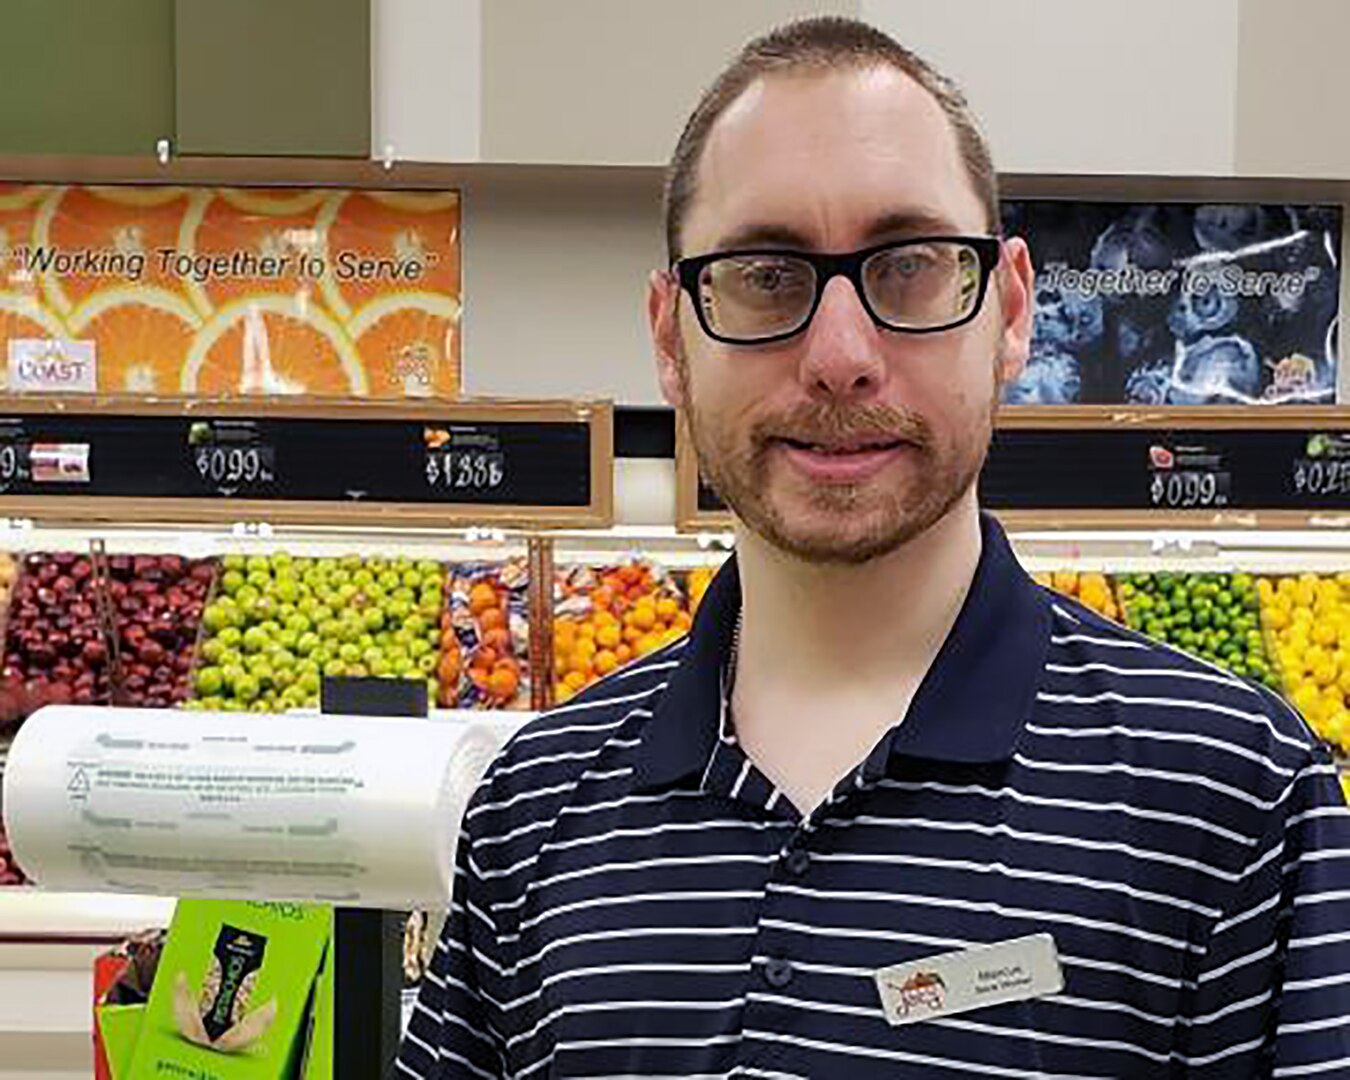 The legally blind Marcus Montague, who has worked at the Fort Sam Houston commissary for six years, was nominated in May for the 2020 Annual Secretary of Defense Awards for Components and Individuals.